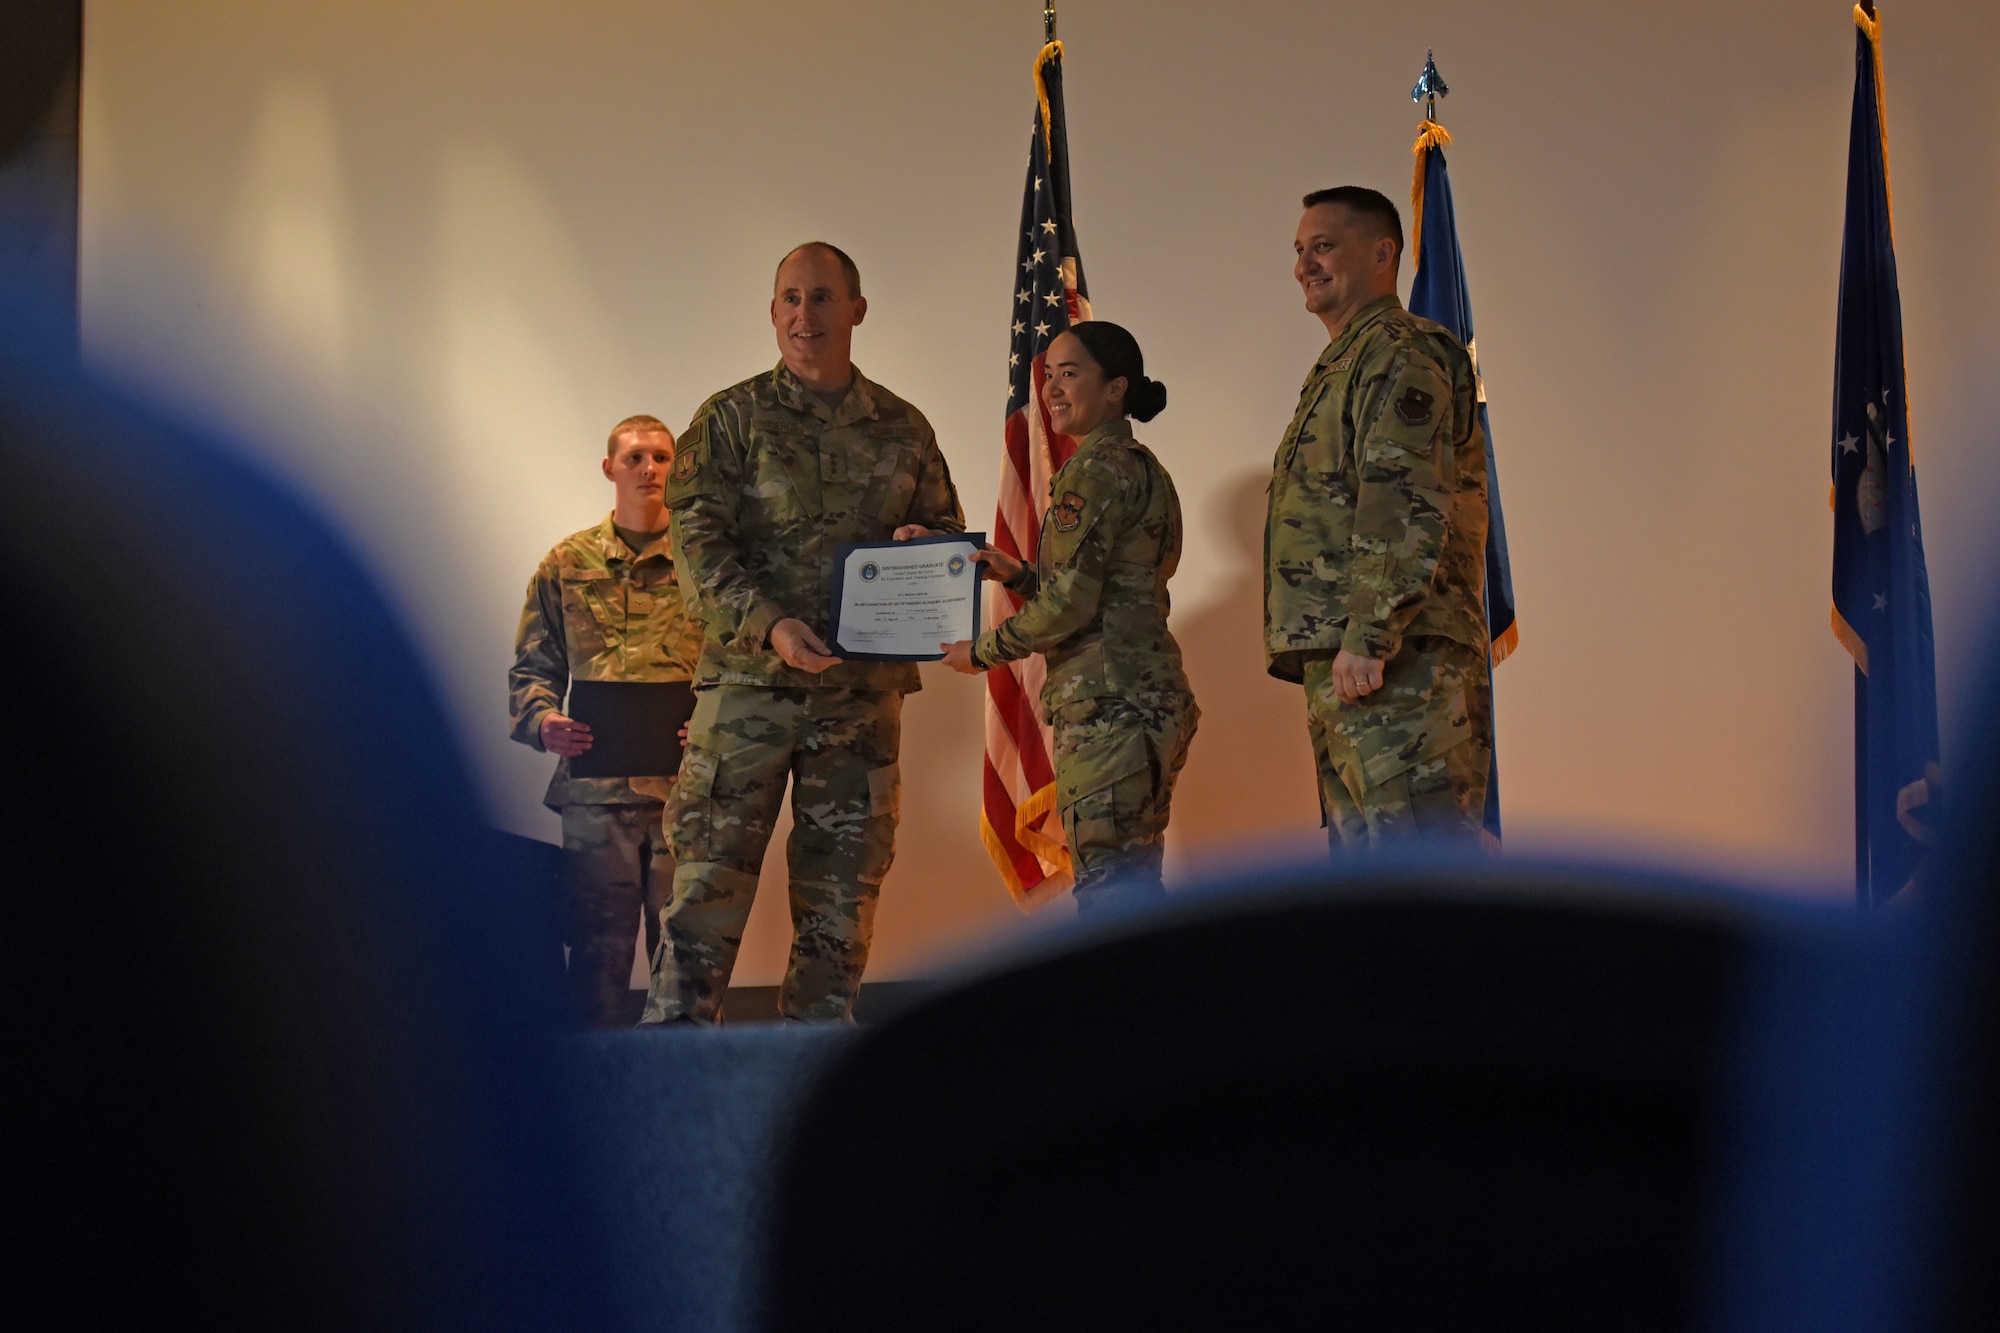 U.S. Air Force Lt. Gen. Kirk S. Pierce, Lt. Gen. Kirk S. Pierce, commander of Continental U.S. North American Aerospace Defense Command Region and 1st Air Force (Air Forces Northern and Air Forces Space), presents the Distinguished Graduate award to Airman 1st Class Maria Garcia, 315th Training Squadron student, during the 315th TRS’s intelligence, surveillance, and reconnaissance professionals’ graduation ceremony, at Goodfellow Air Force Base, Texas, May 24, 2022. Garcia was recognized for her outstanding academic achievement during her training. (U.S. Air Force photo by Senior Airman Abbey Rieves)